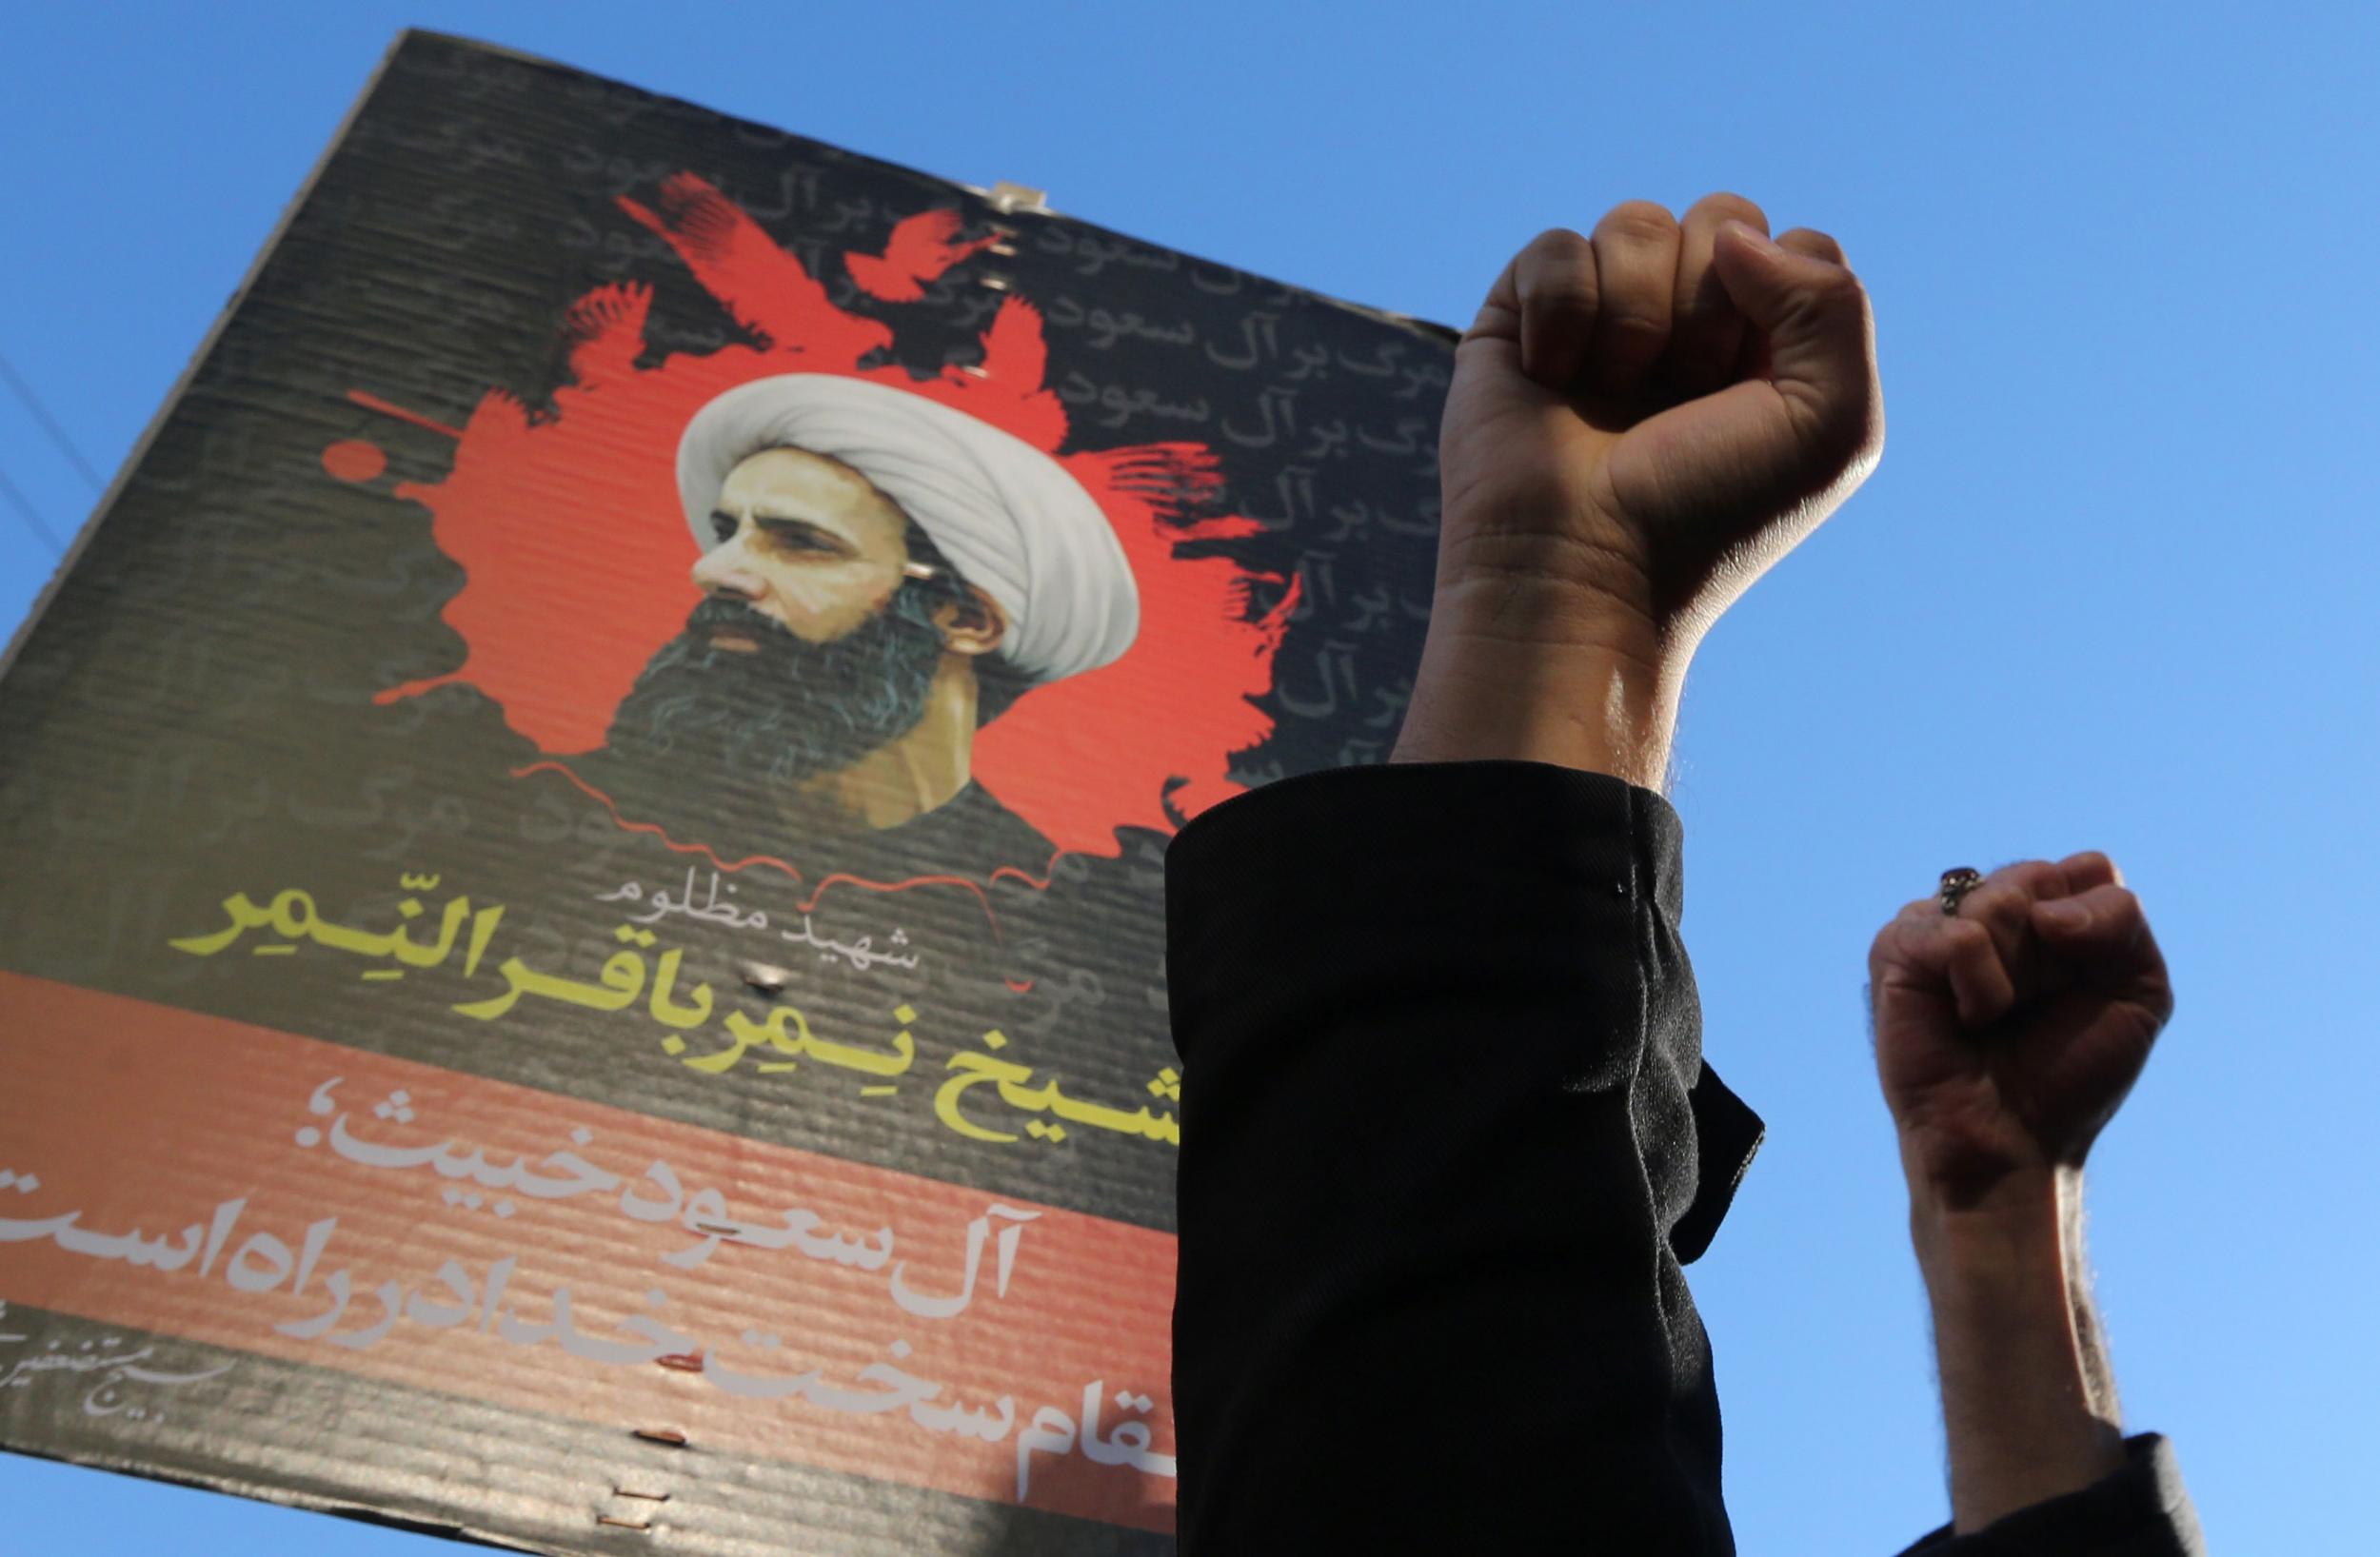 Protesters raise their fists in front of a portrait of prominent Shiite Muslim cleric Nimr al-Nimr during a demonstration against his execution by Saudi authorities, on January 3, 2016